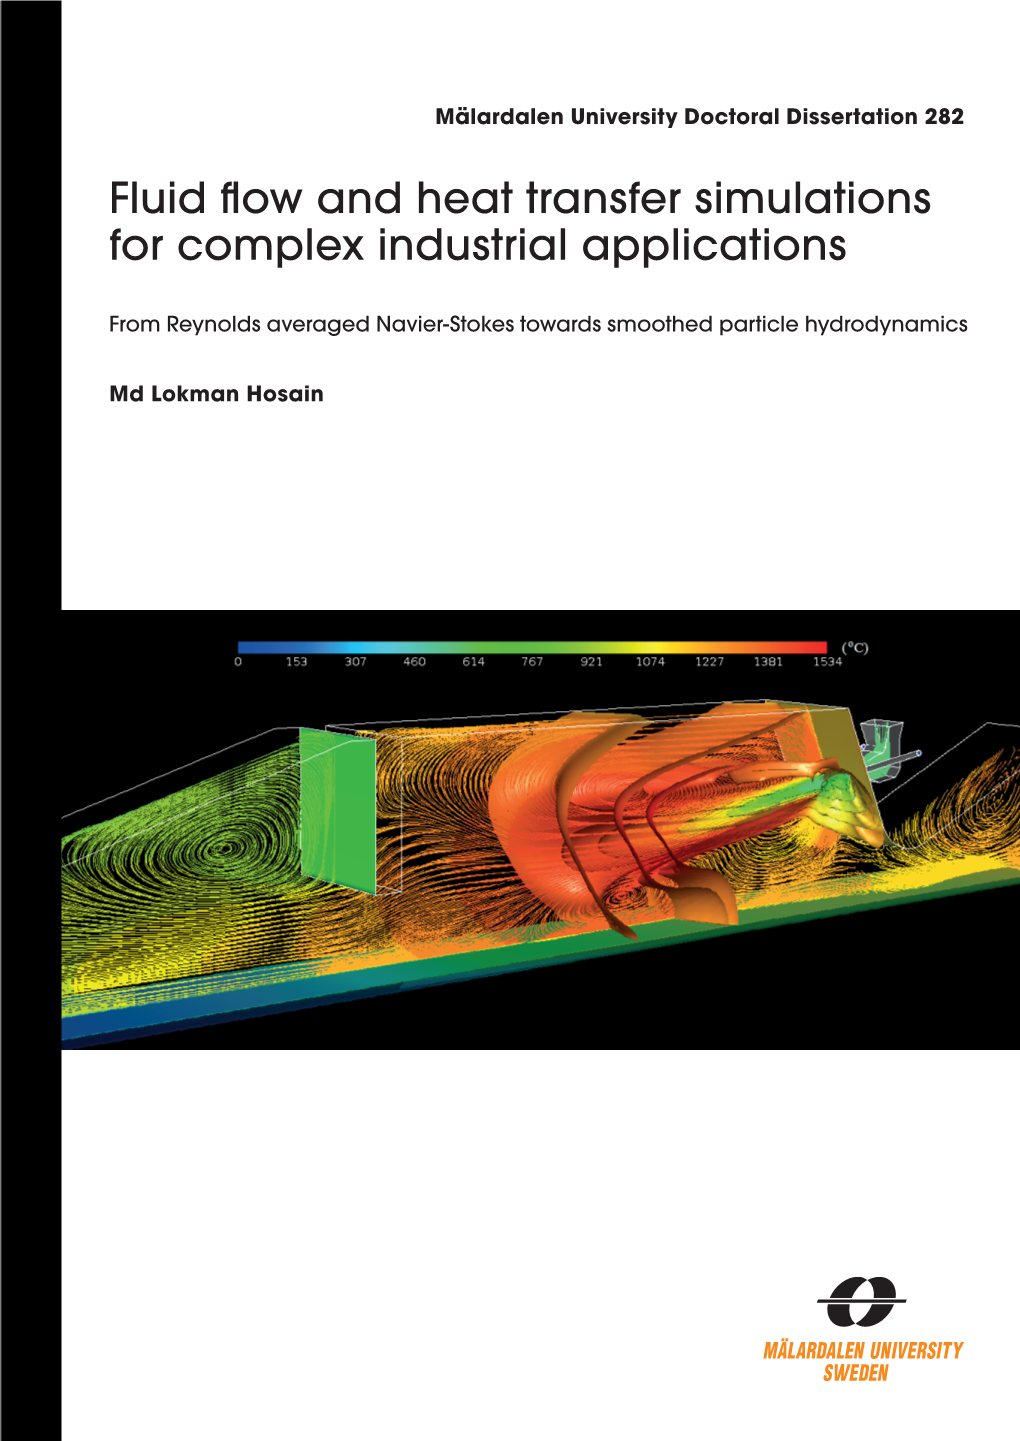 Fluid Flow and Heat Transfer Simulations for Complex Industrial Applications 2018 Isbn 978-91-7485-415-2 Issn 1651-4238 P.O